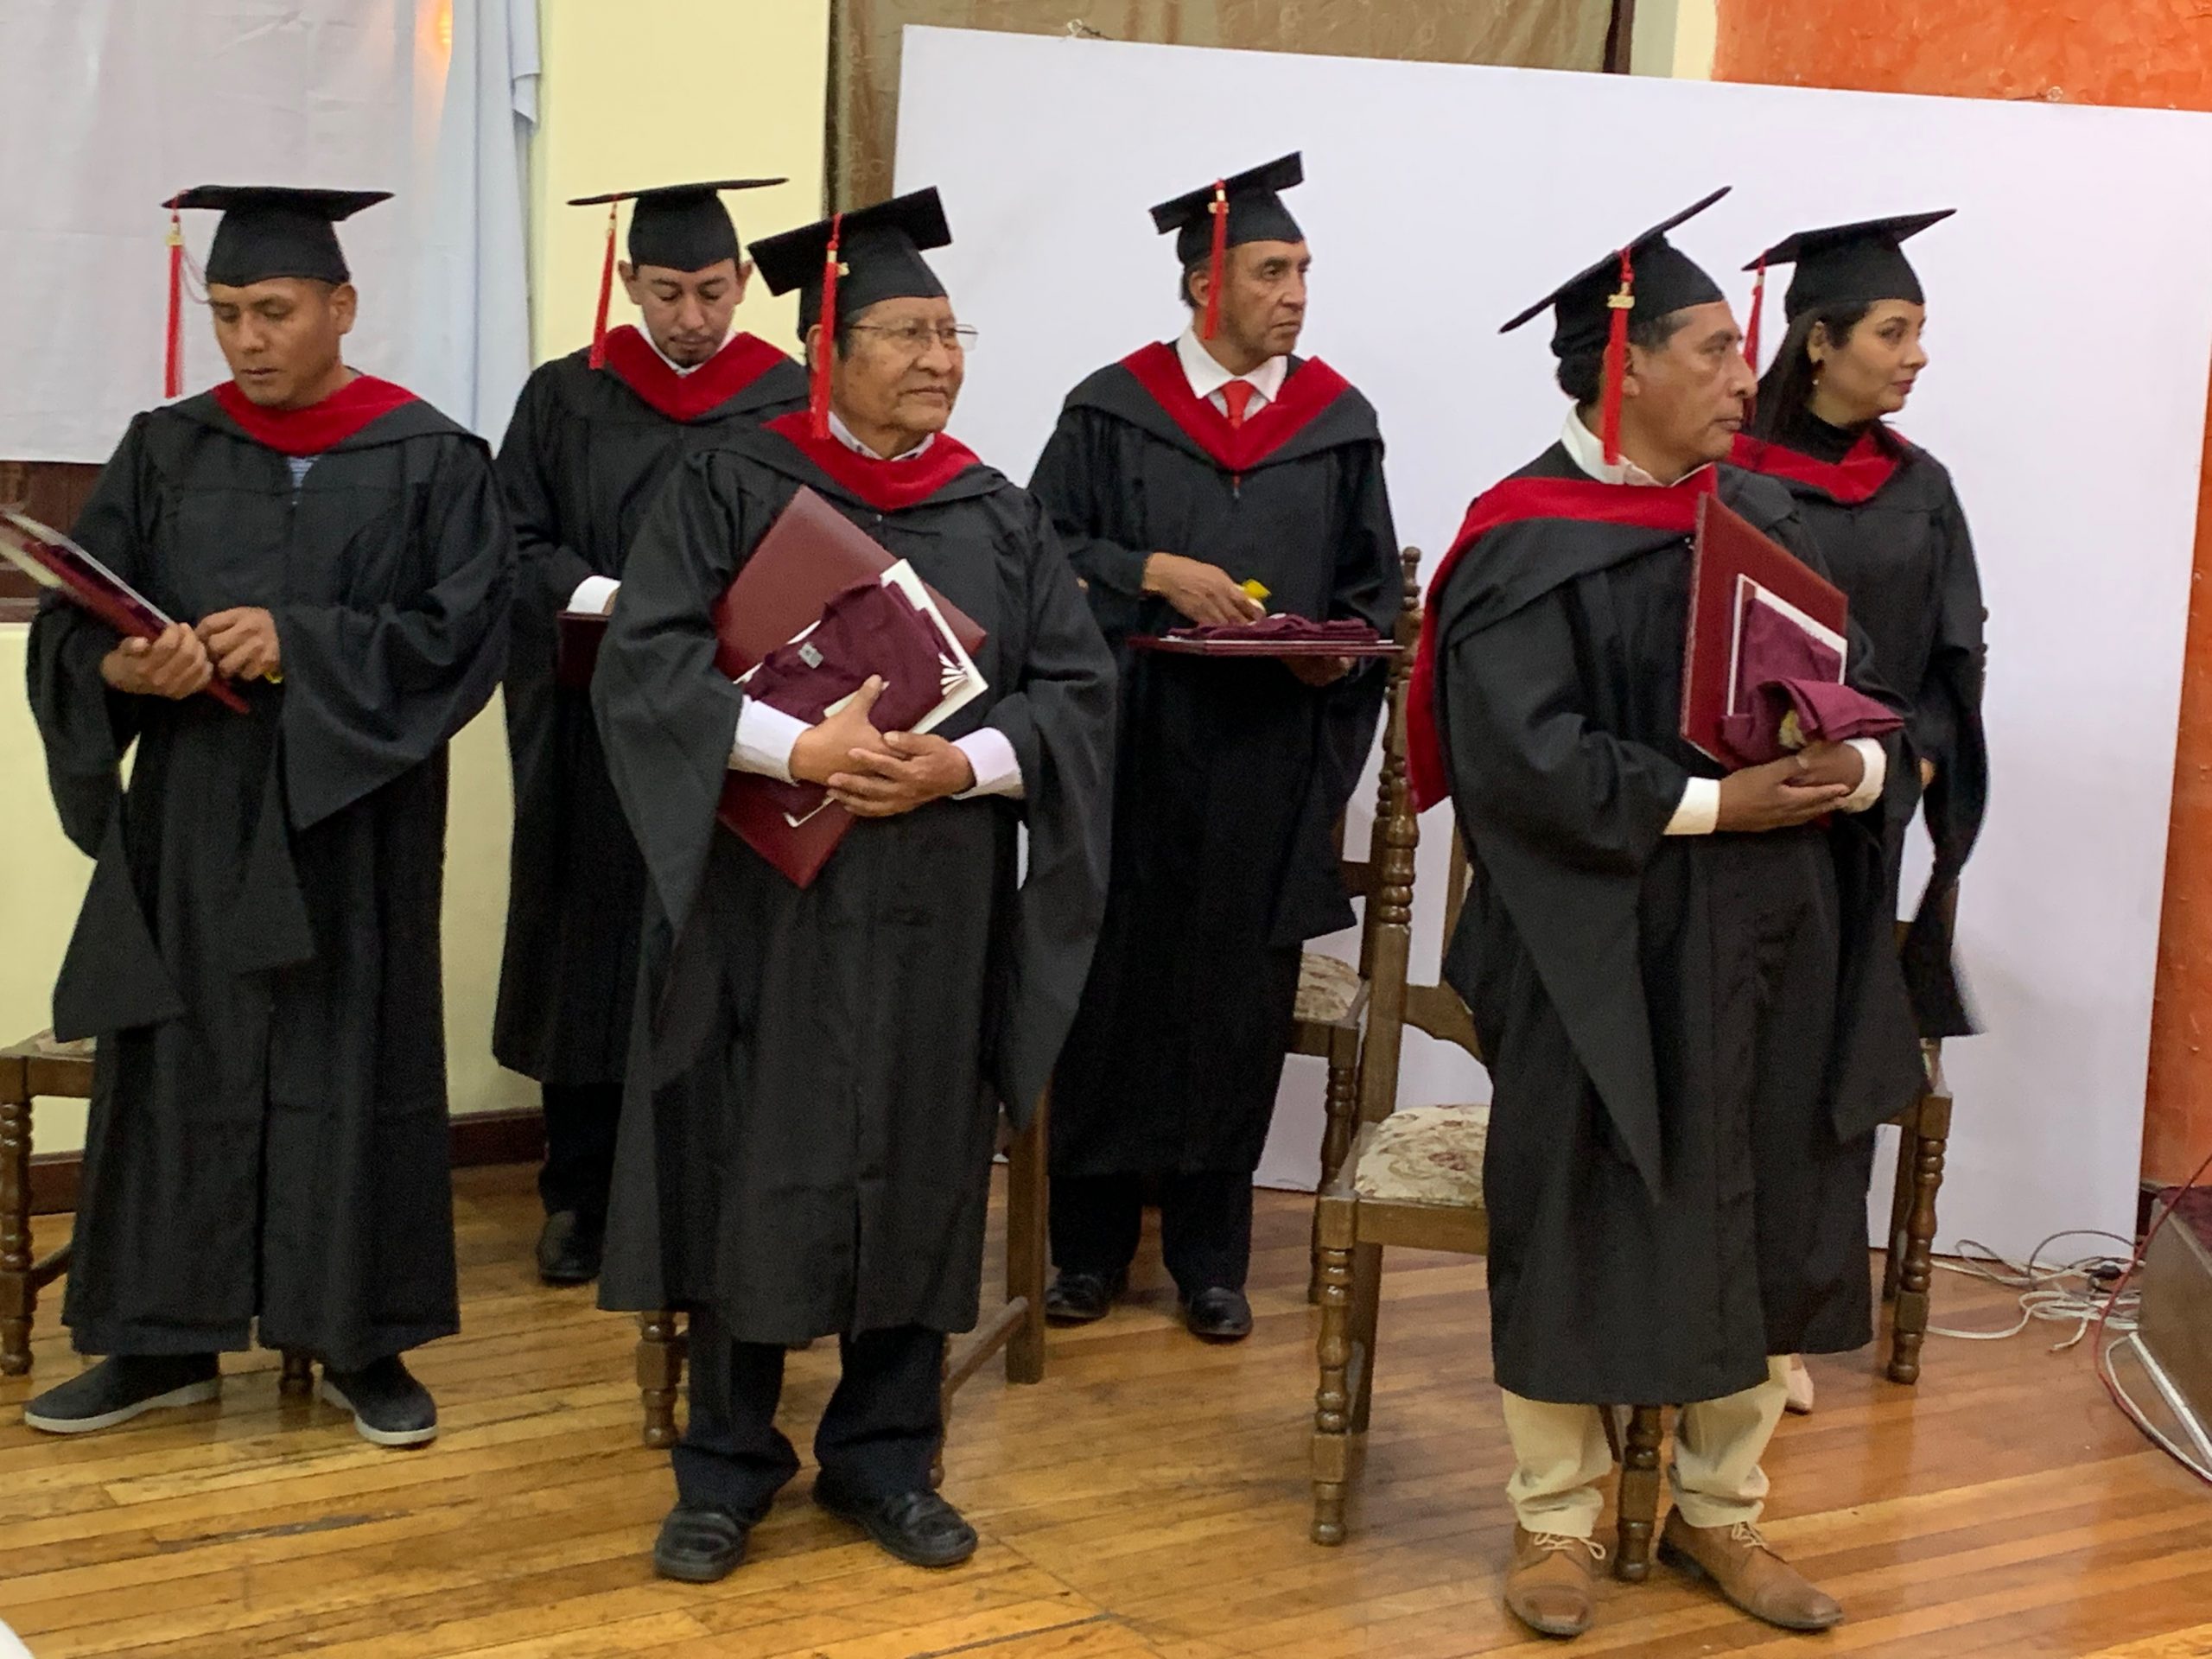 Students in Bolivia after receiving their diplomas and gifts.